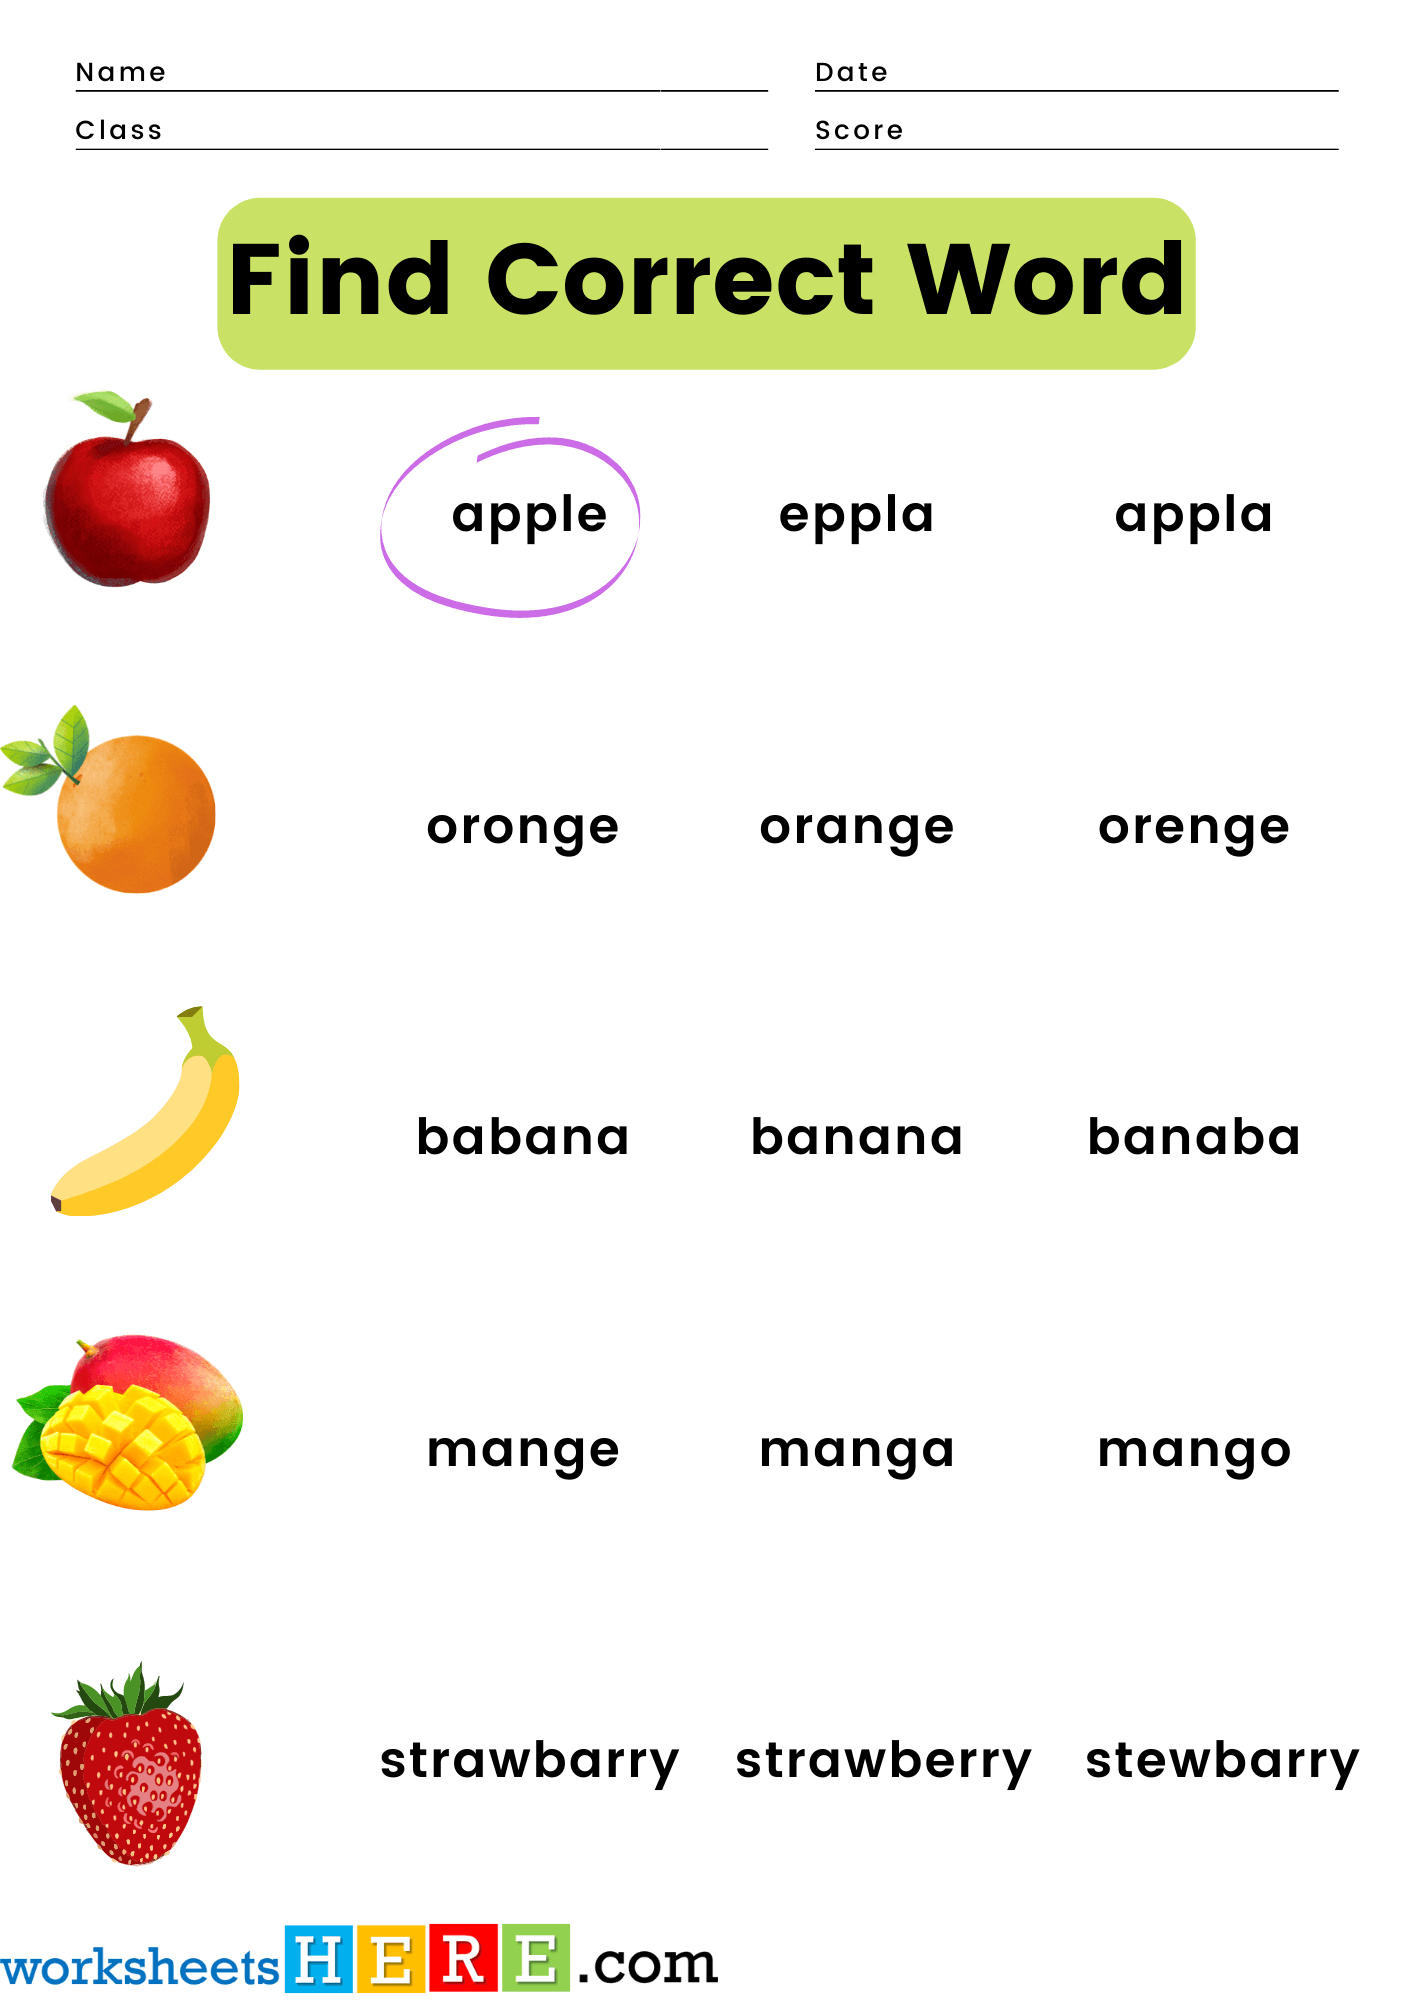 Find Correct Word Activity with Fruits Pictures PDF Worksheet For Kids